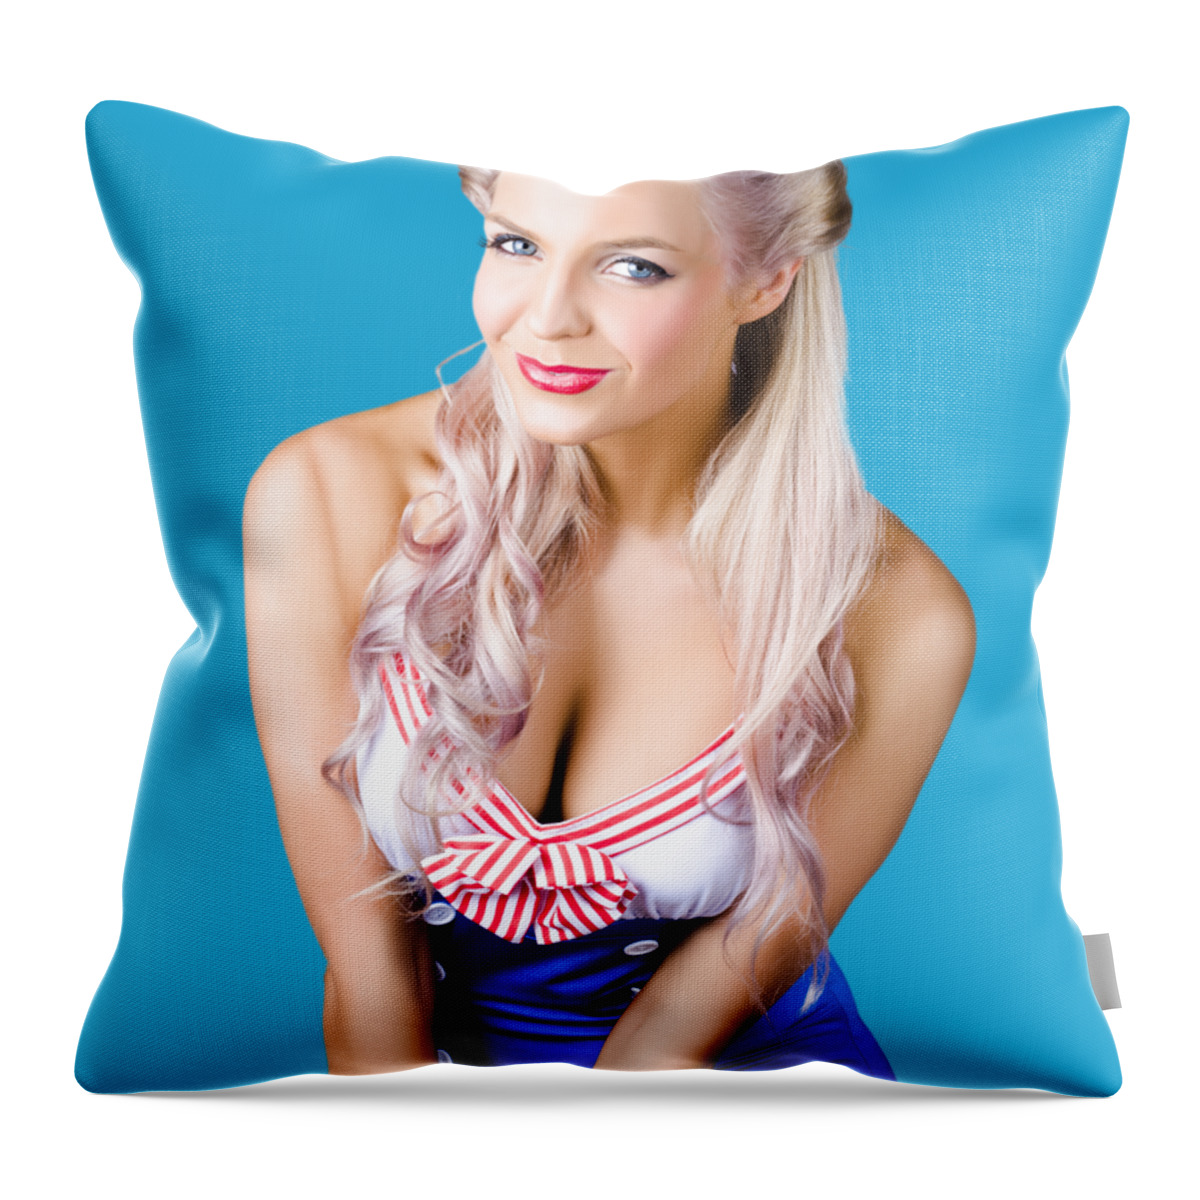 Sailor Throw Pillow featuring the photograph Navy pinup woman by Jorgo Photography